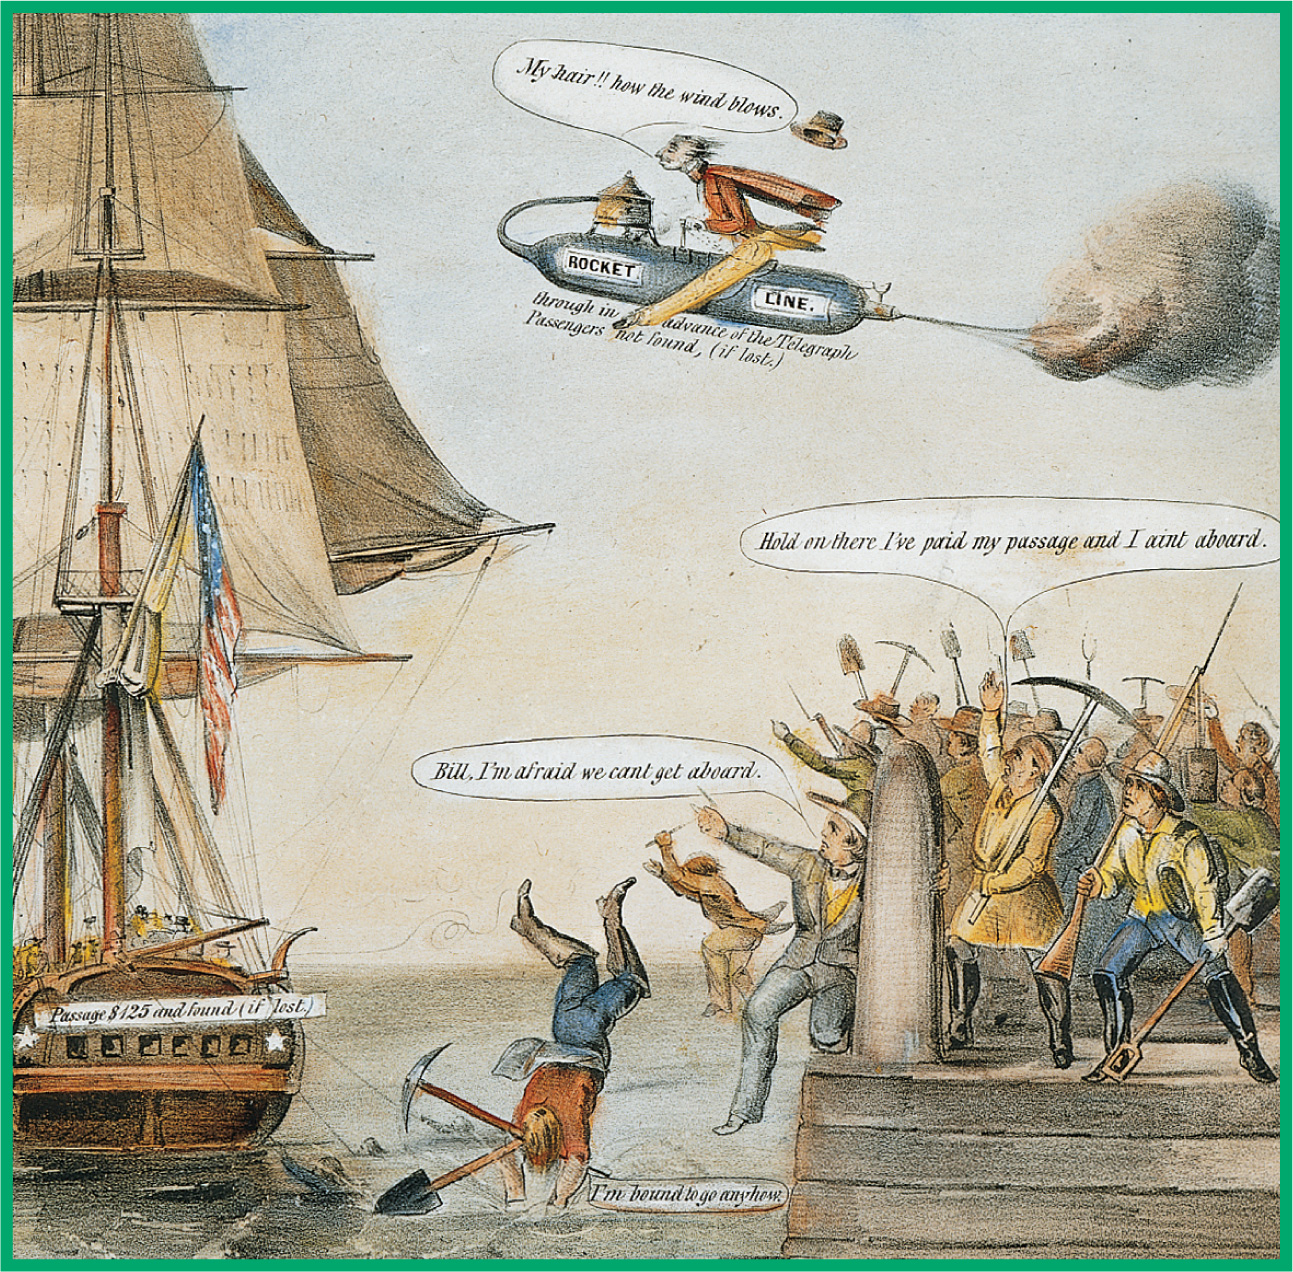 A cartoon shows a boat leaving a dock crowded with prospectors. One man rides a rocket through the sky.